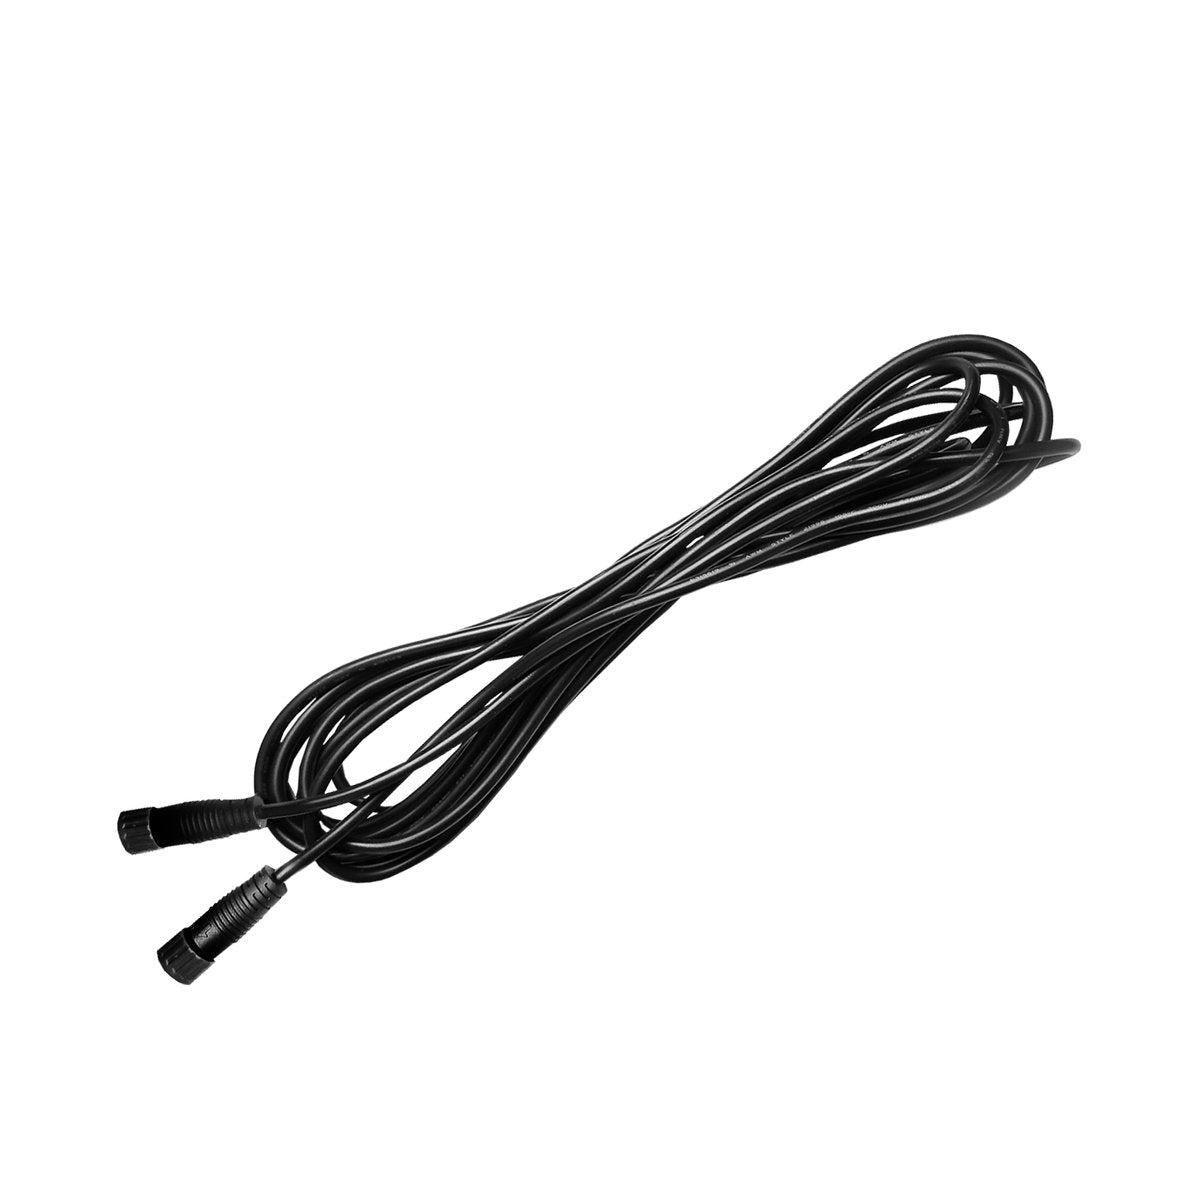 Product Image:PHOTONTEK LED Daisy Chain 5m Control Cable